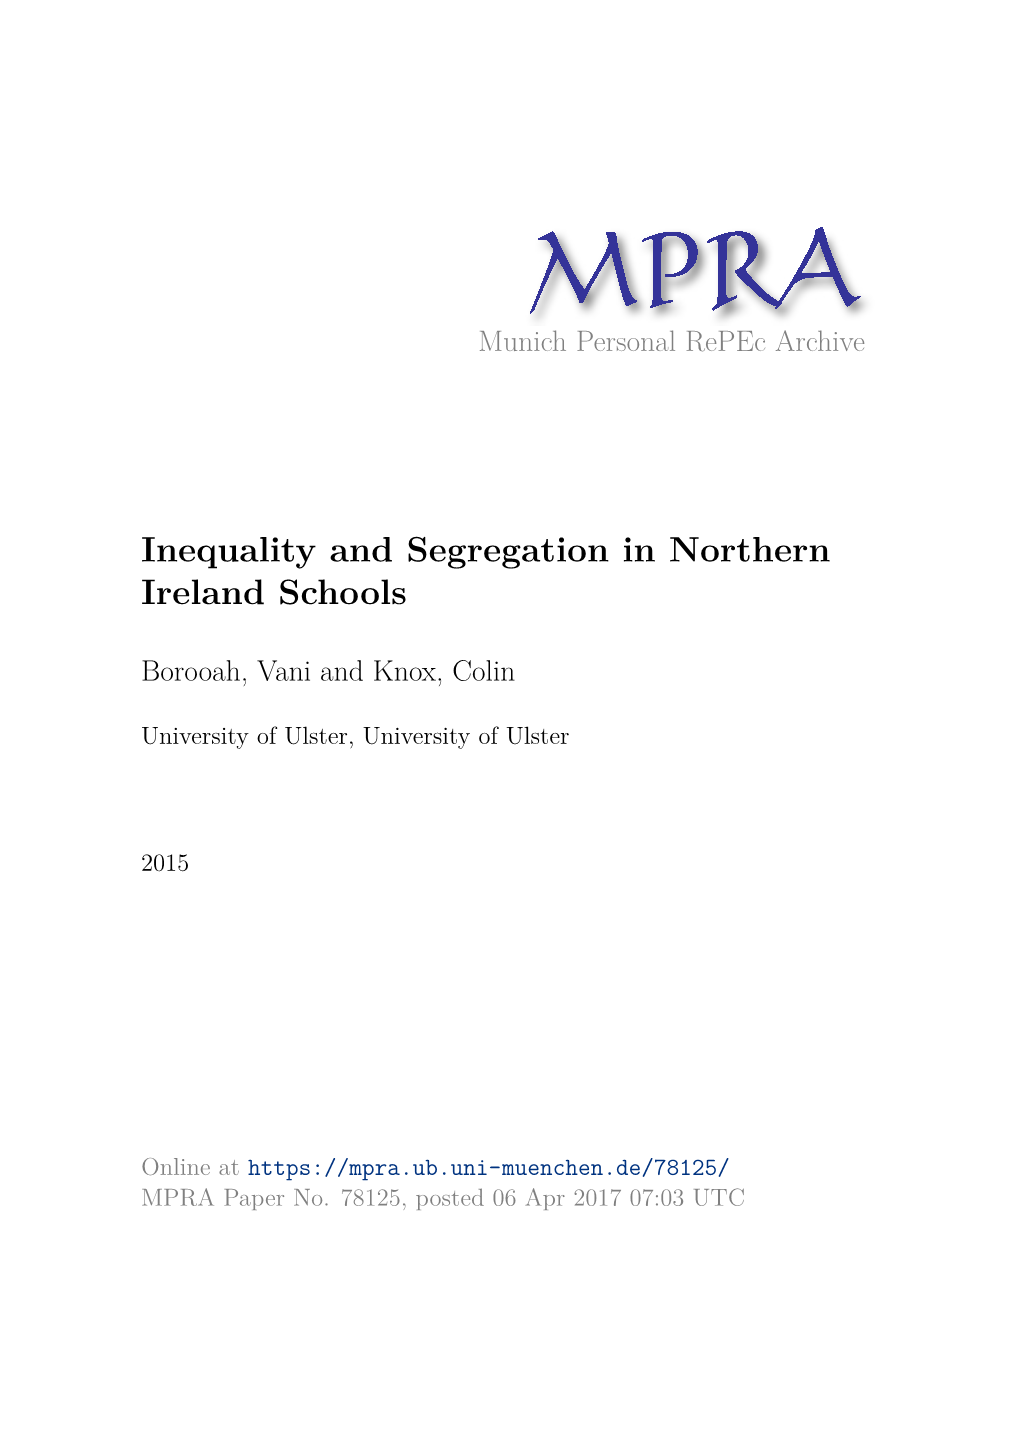 Inequality and Segregation in Northern Ireland Schools